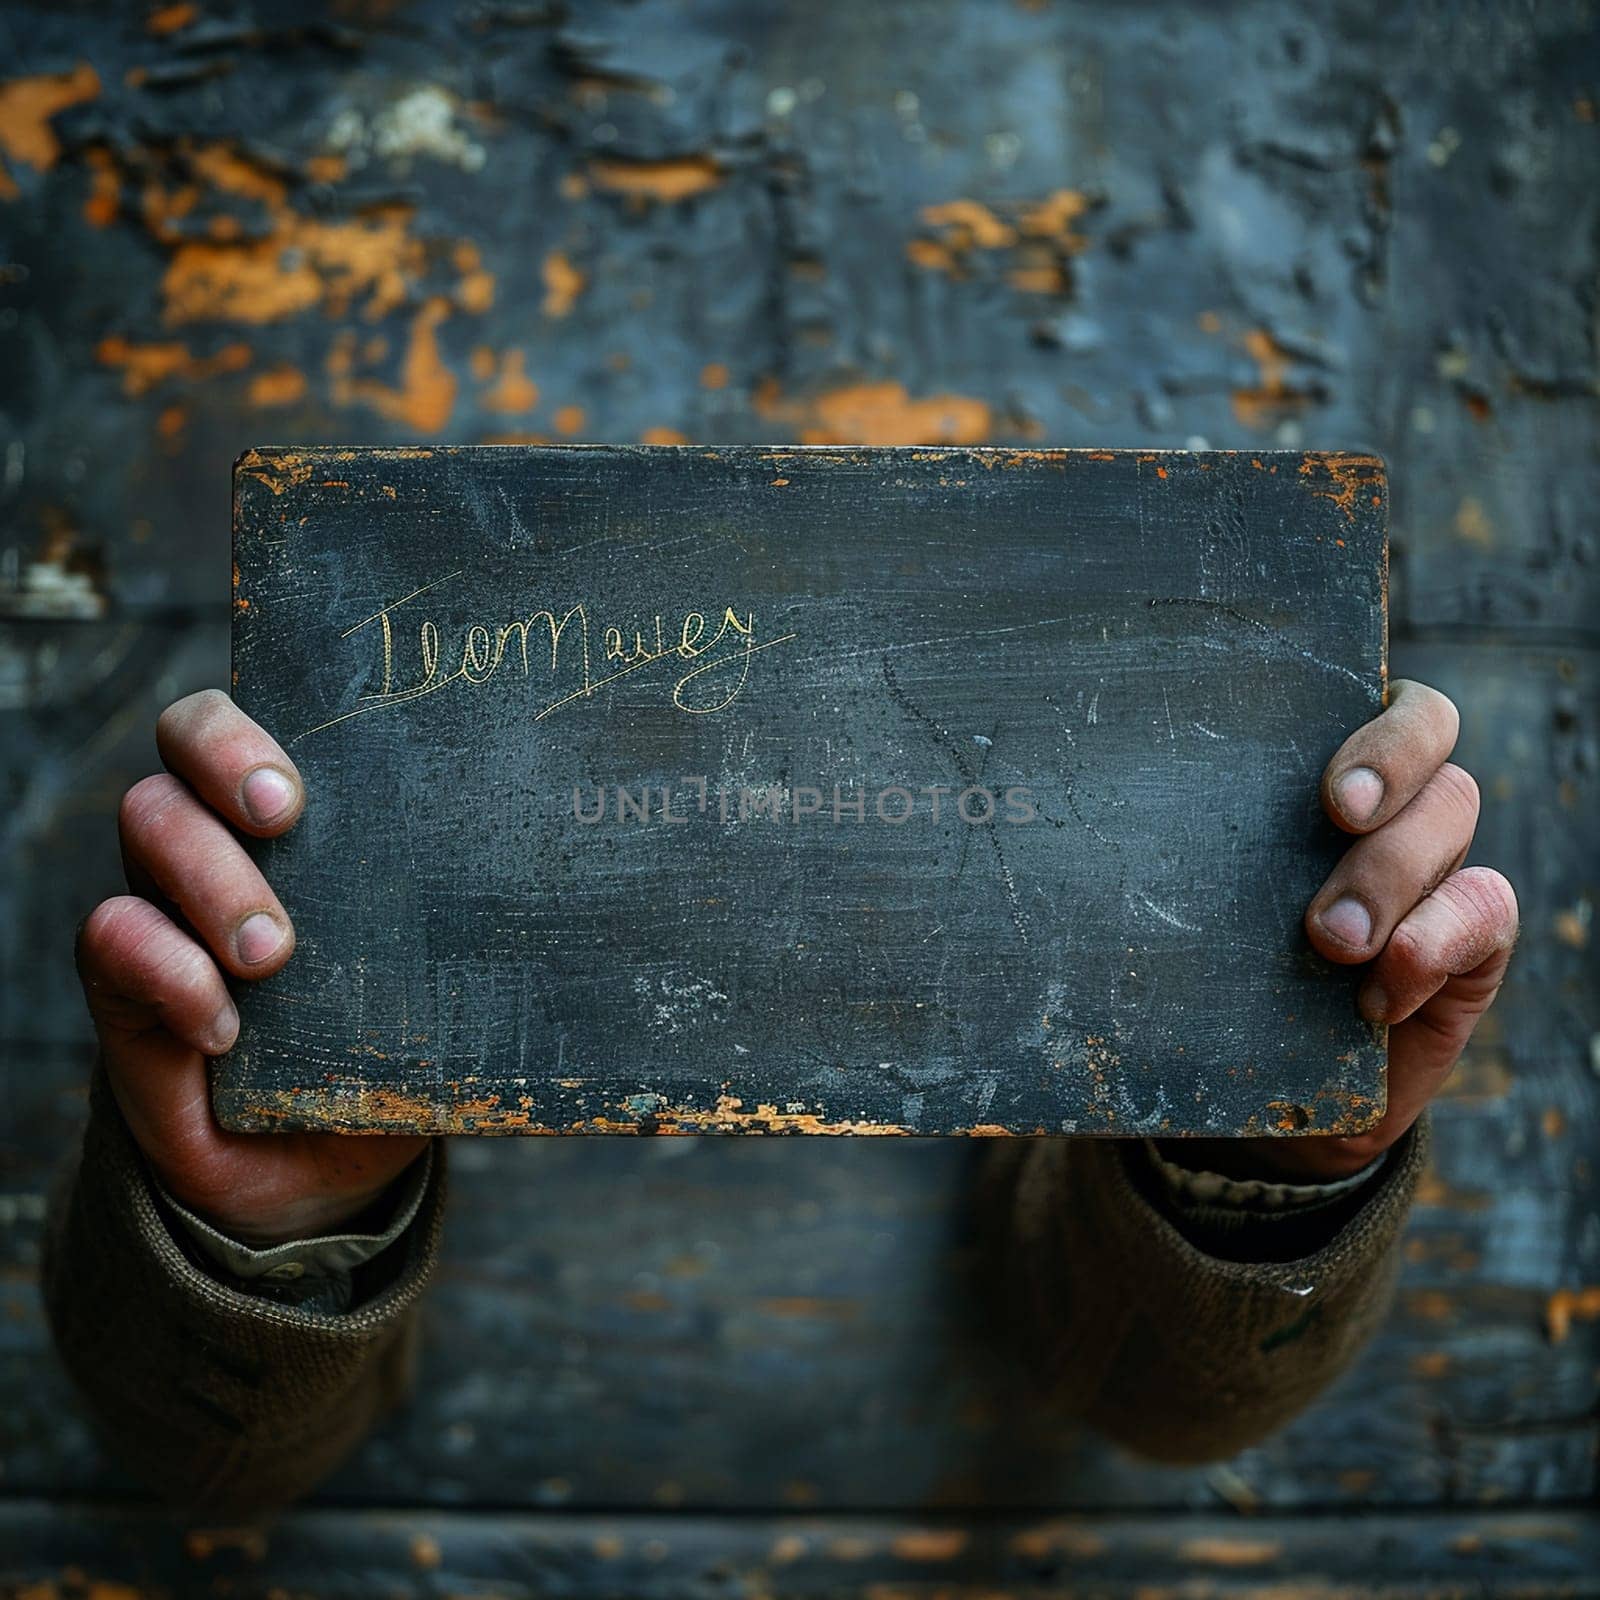 Hand holding a piece of chalk writing on a blackboard, depicting education and communication.